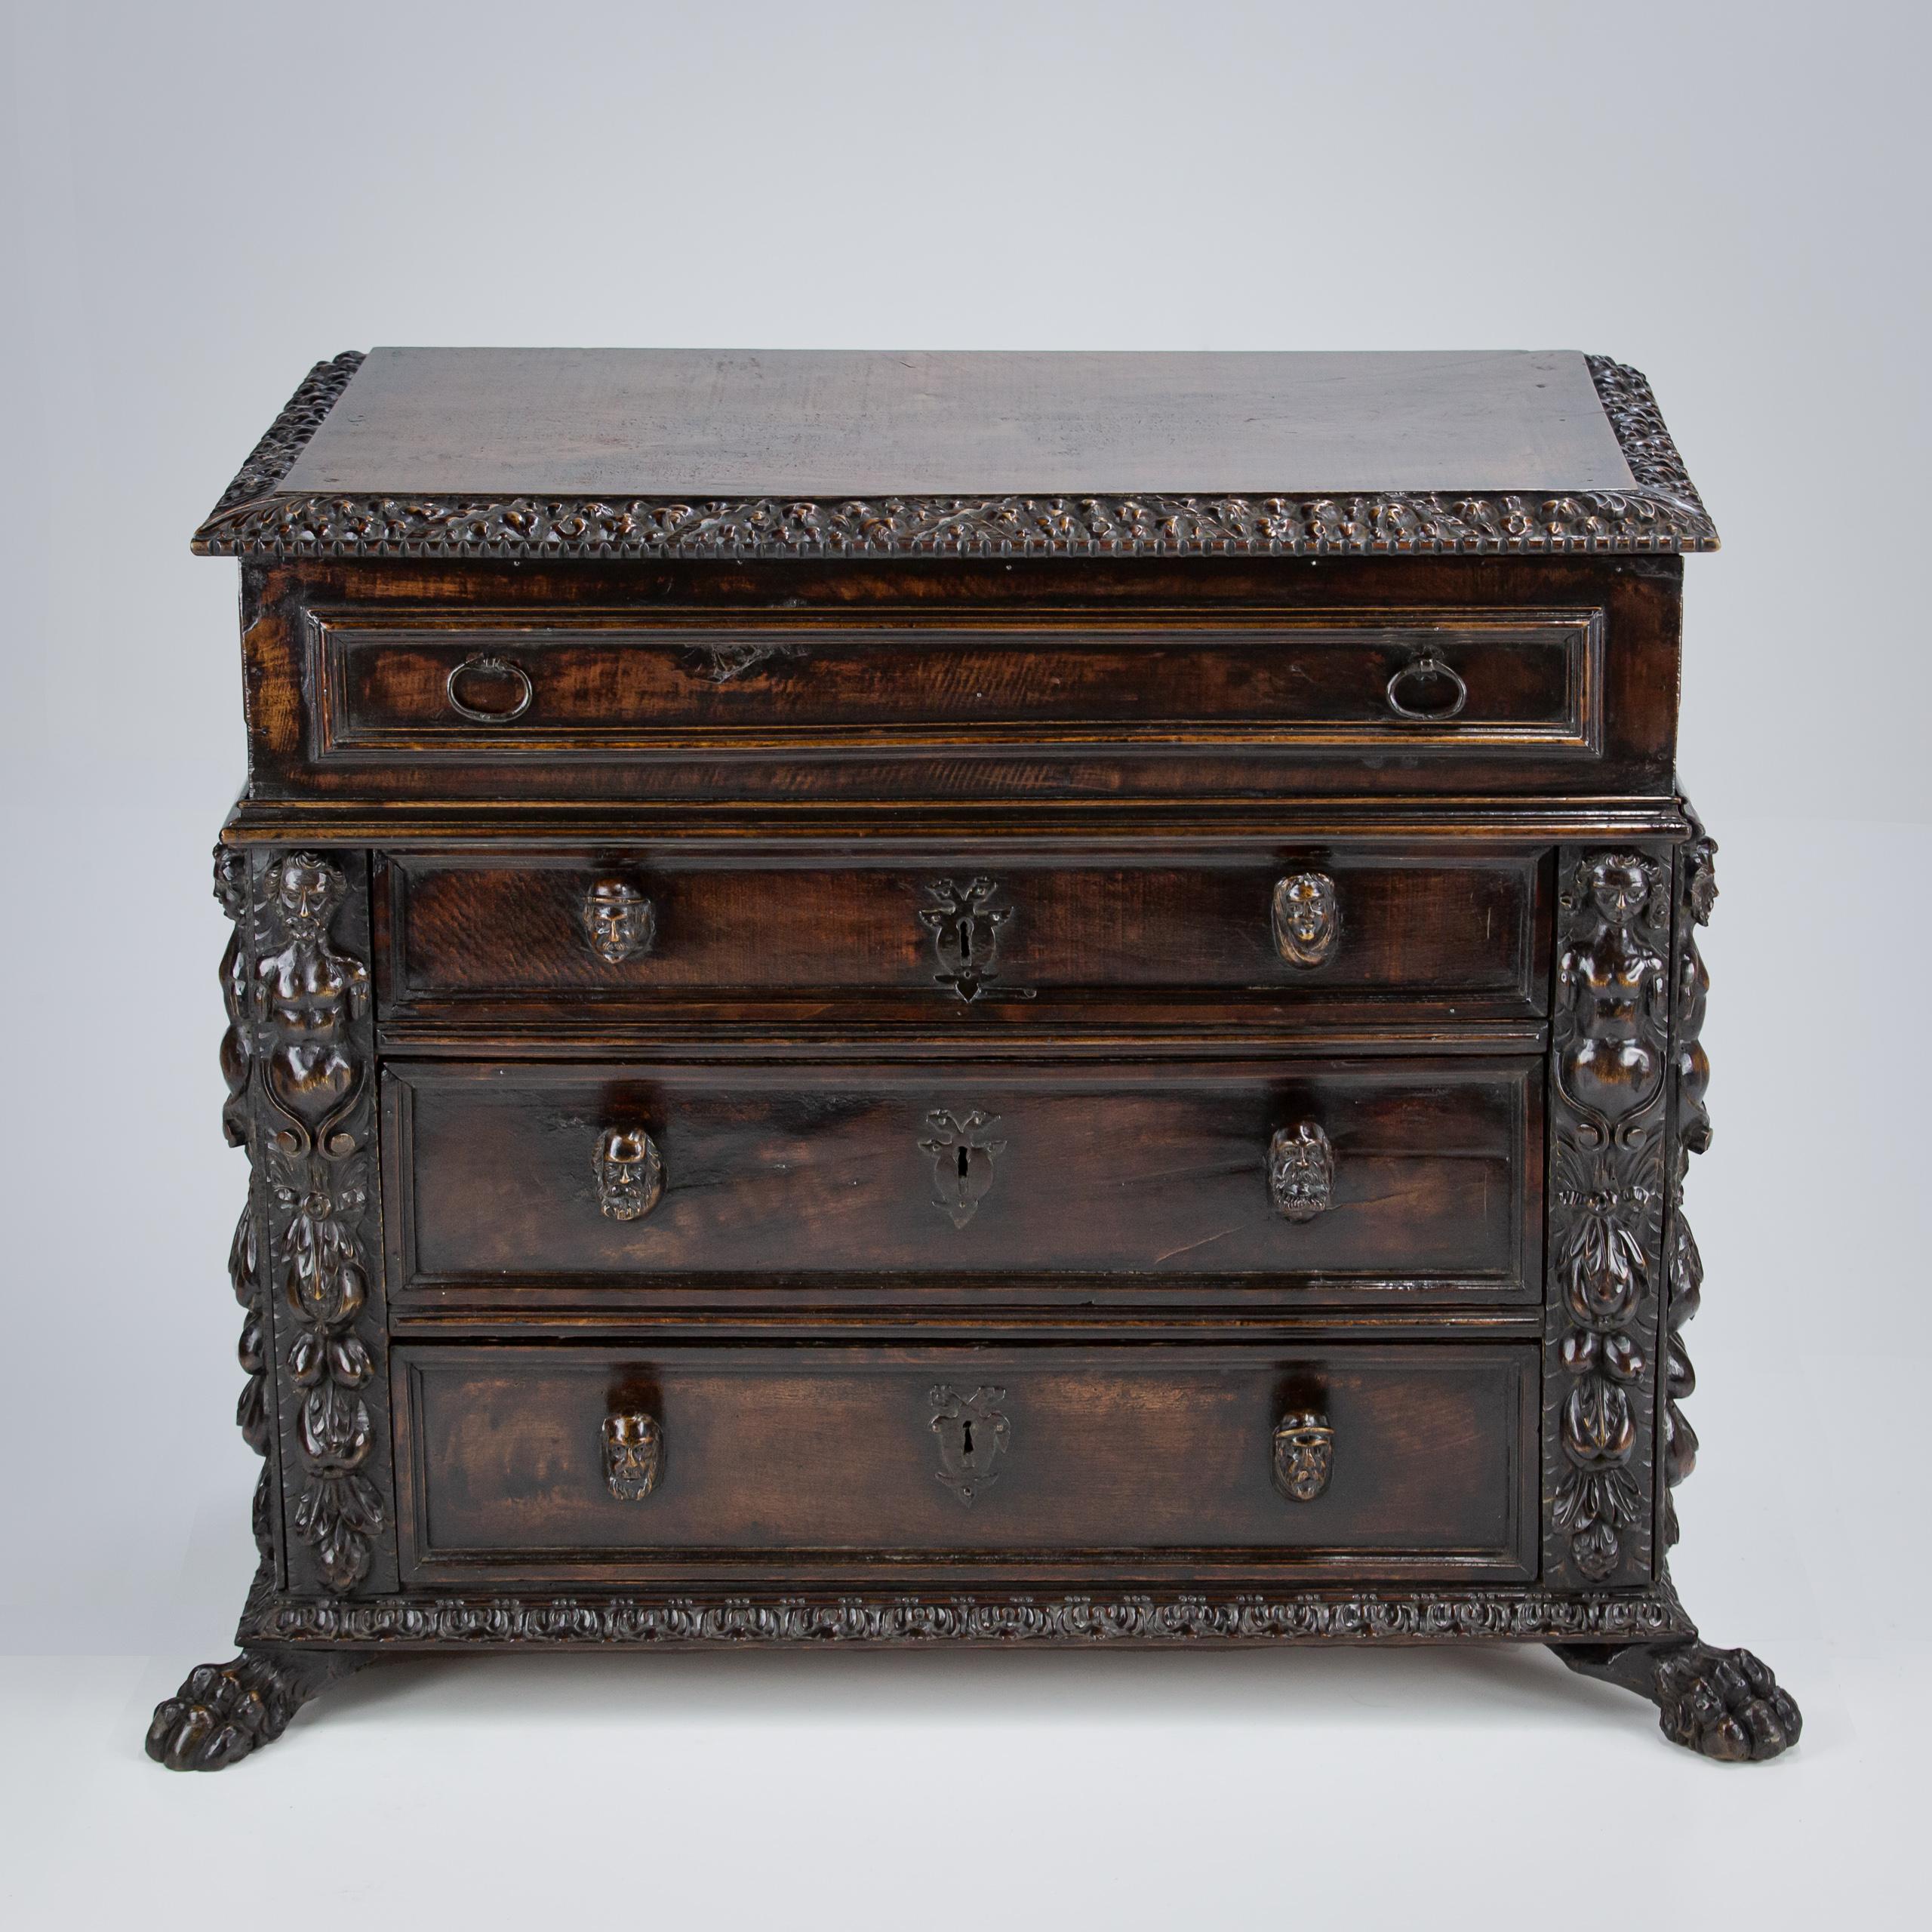 Italian Late 17th or Early 18th Century Walnut Bambocci Commode For Sale